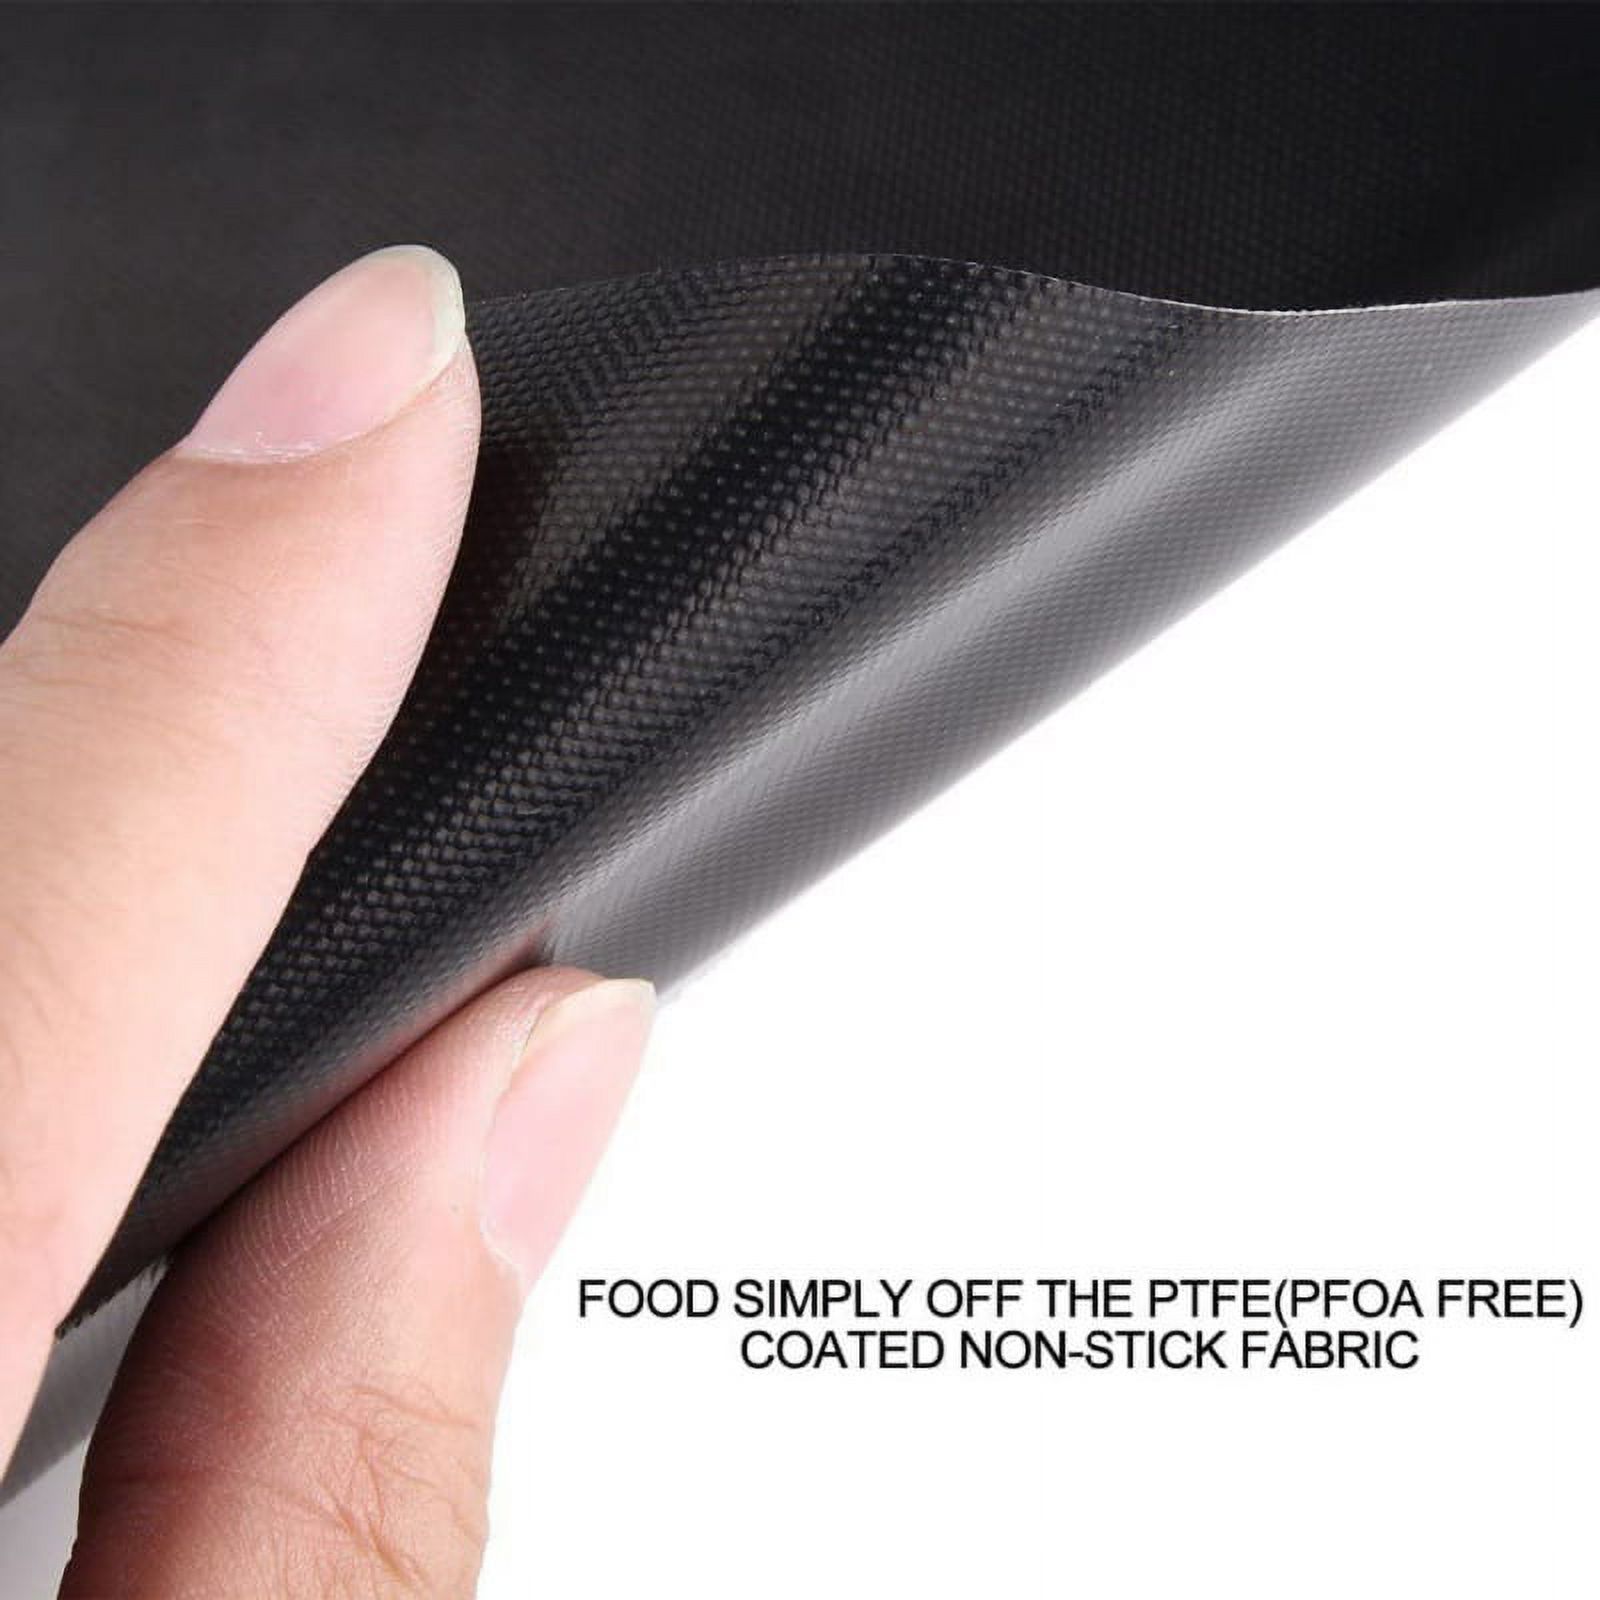 4Pcs/Pack Grill Mat BBQ Tool, Non-stick Reusable, For Food Heating, Grills and Ovens, 13*16" - image 2 of 8